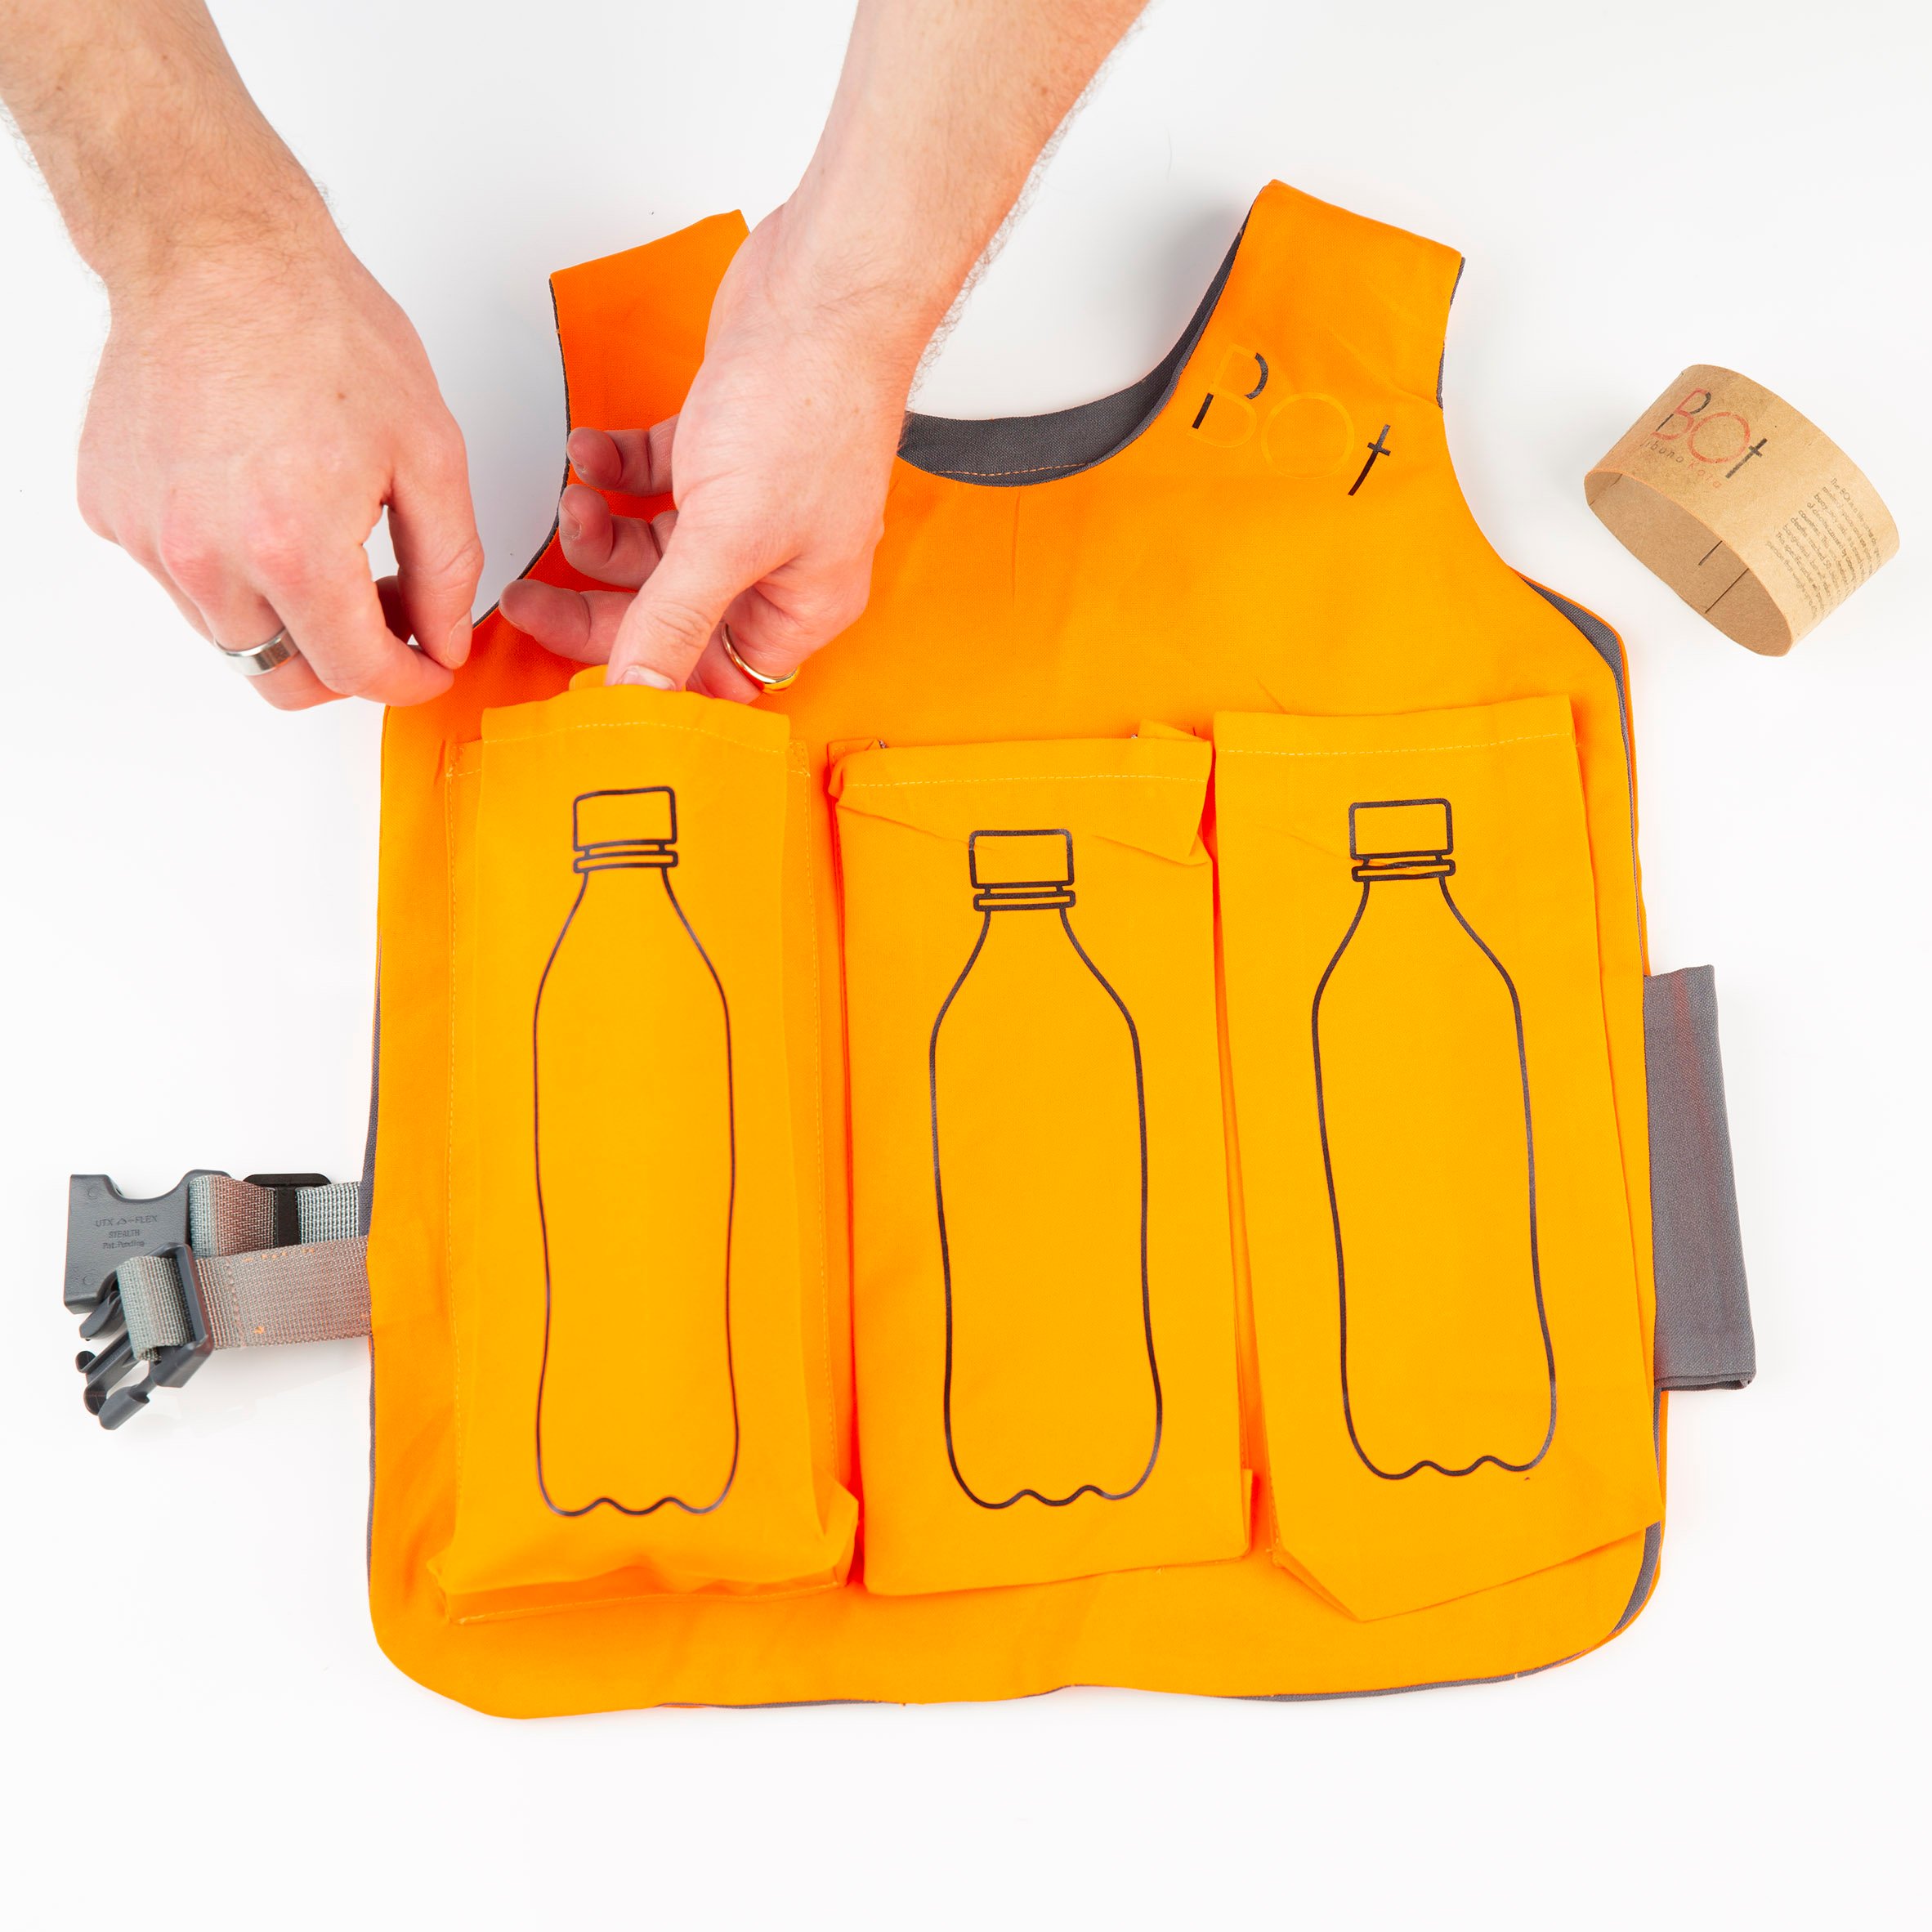 Bot lifejacket uses plastic waste to prevent drownings